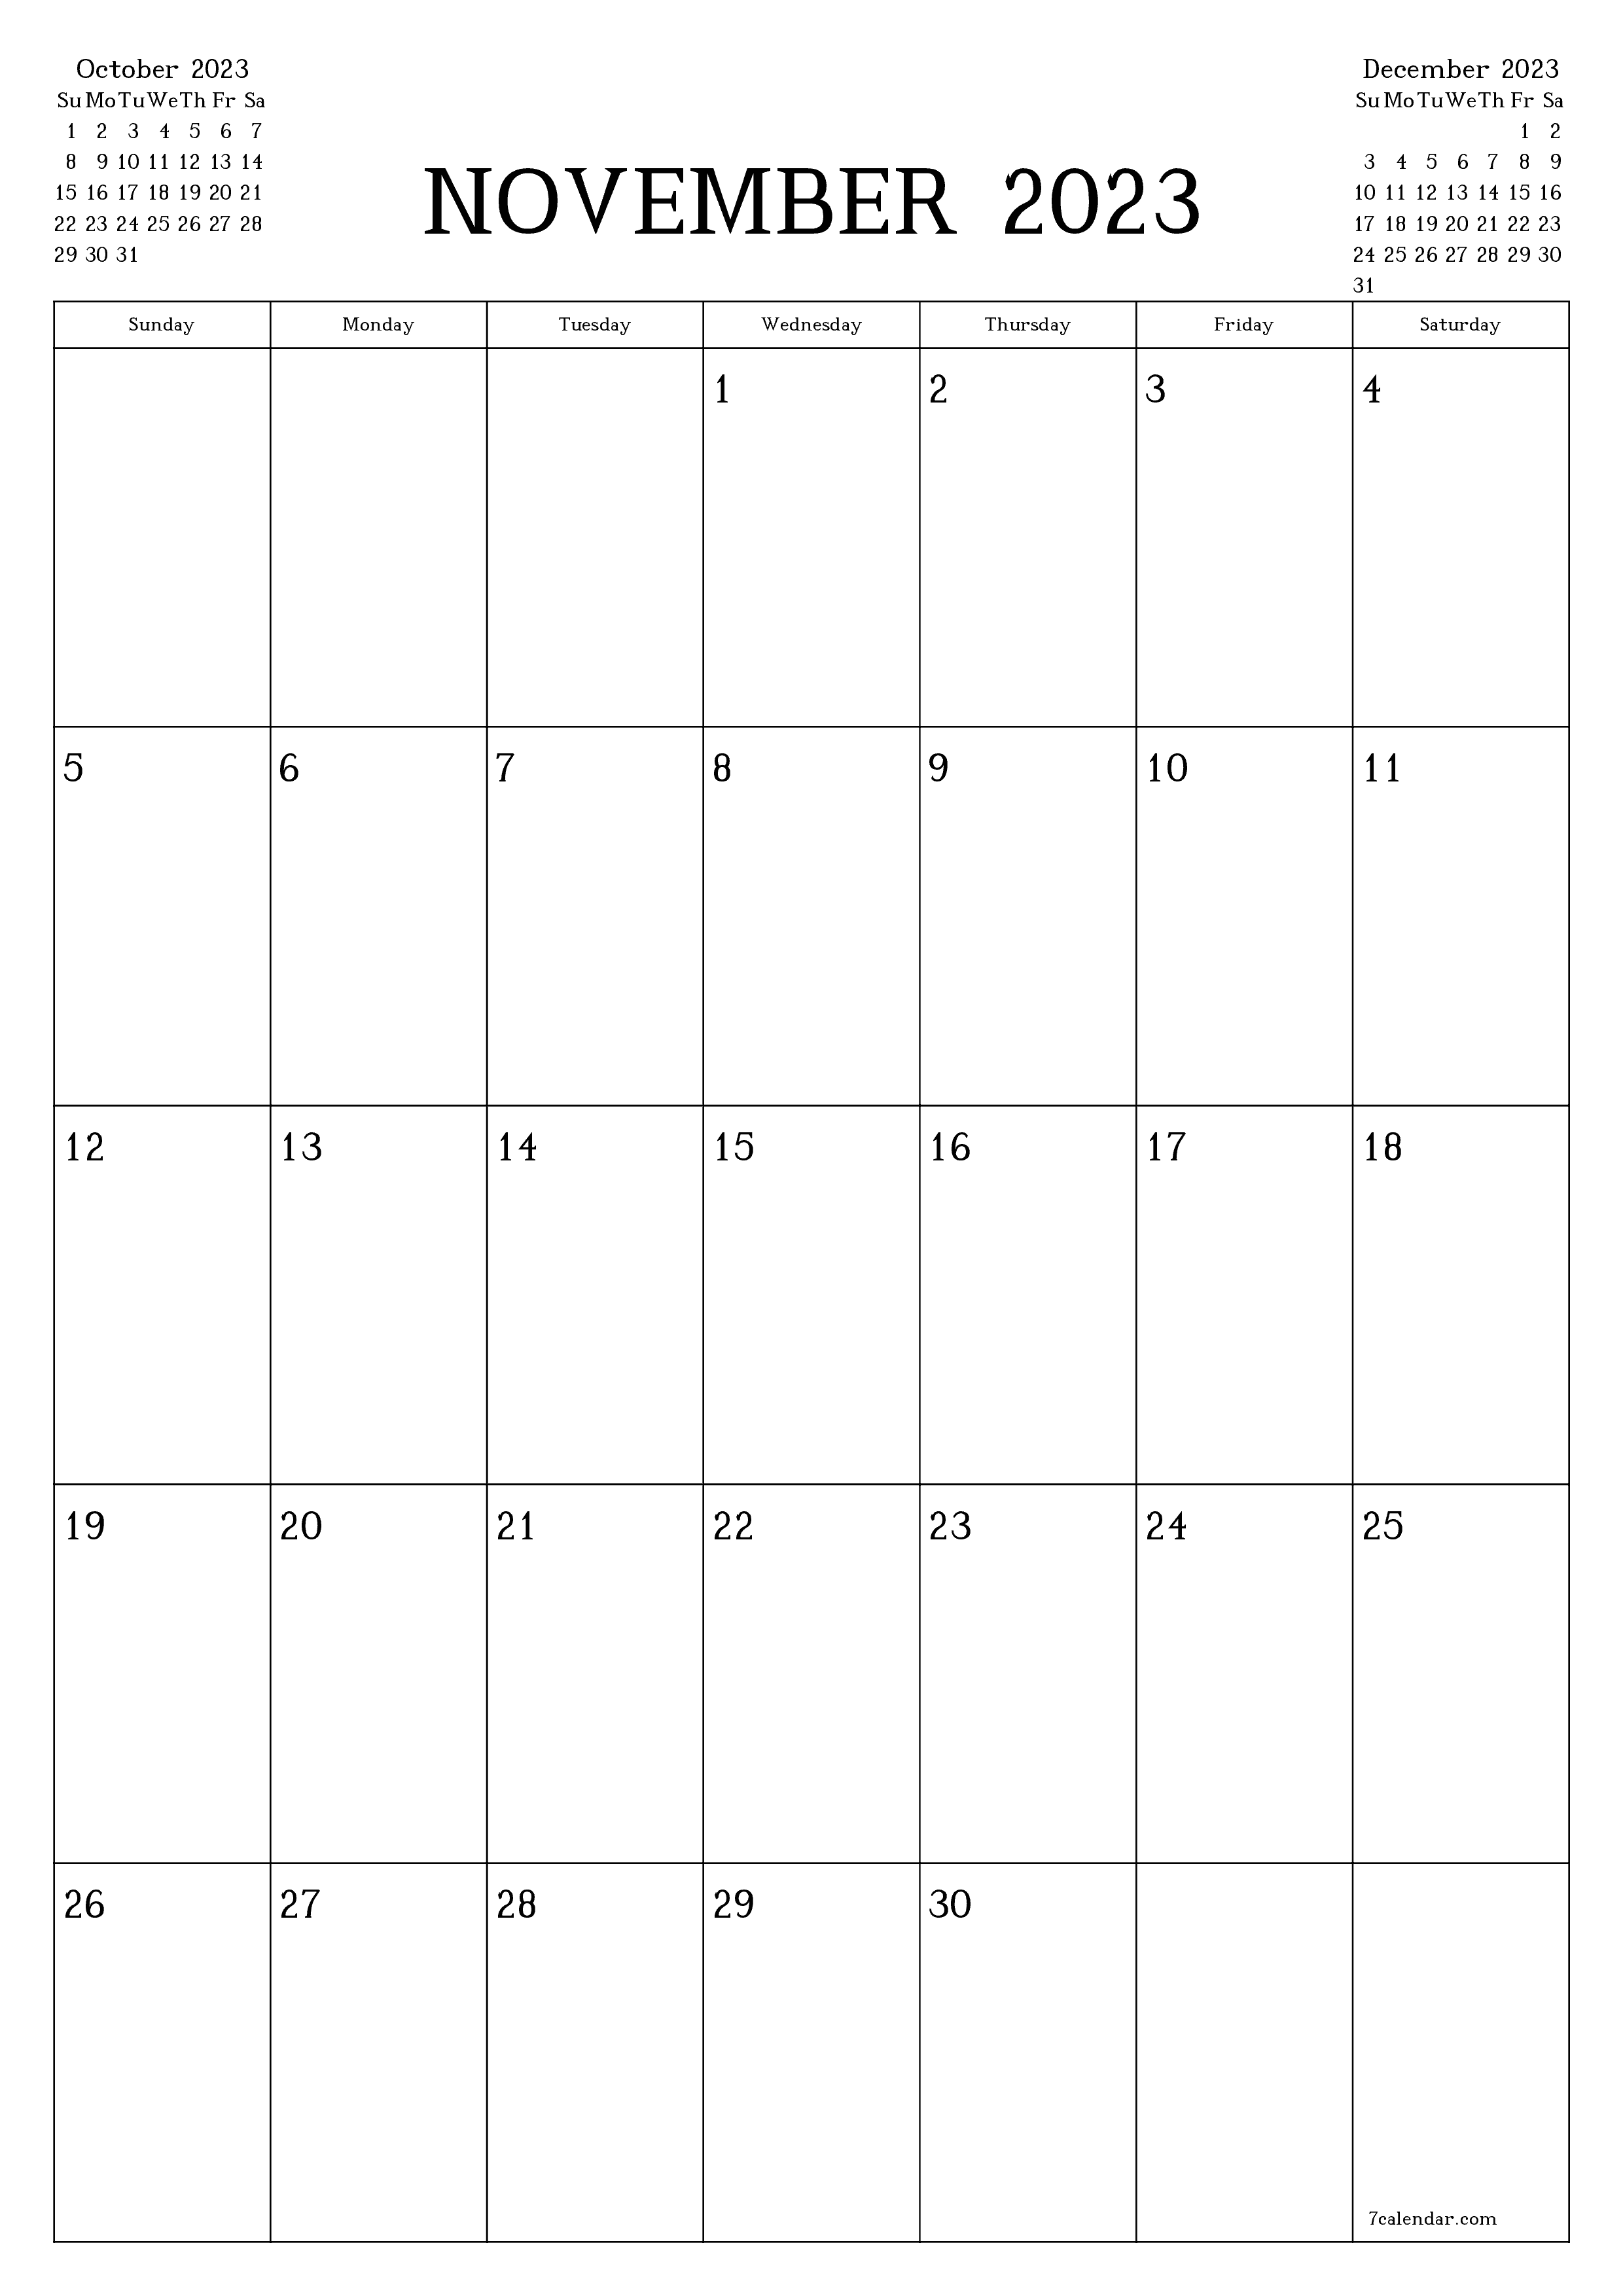 Blank monthly printable calendar and planner for month November 2023 with notes save and print to PDF PNG English - 7calendar.com